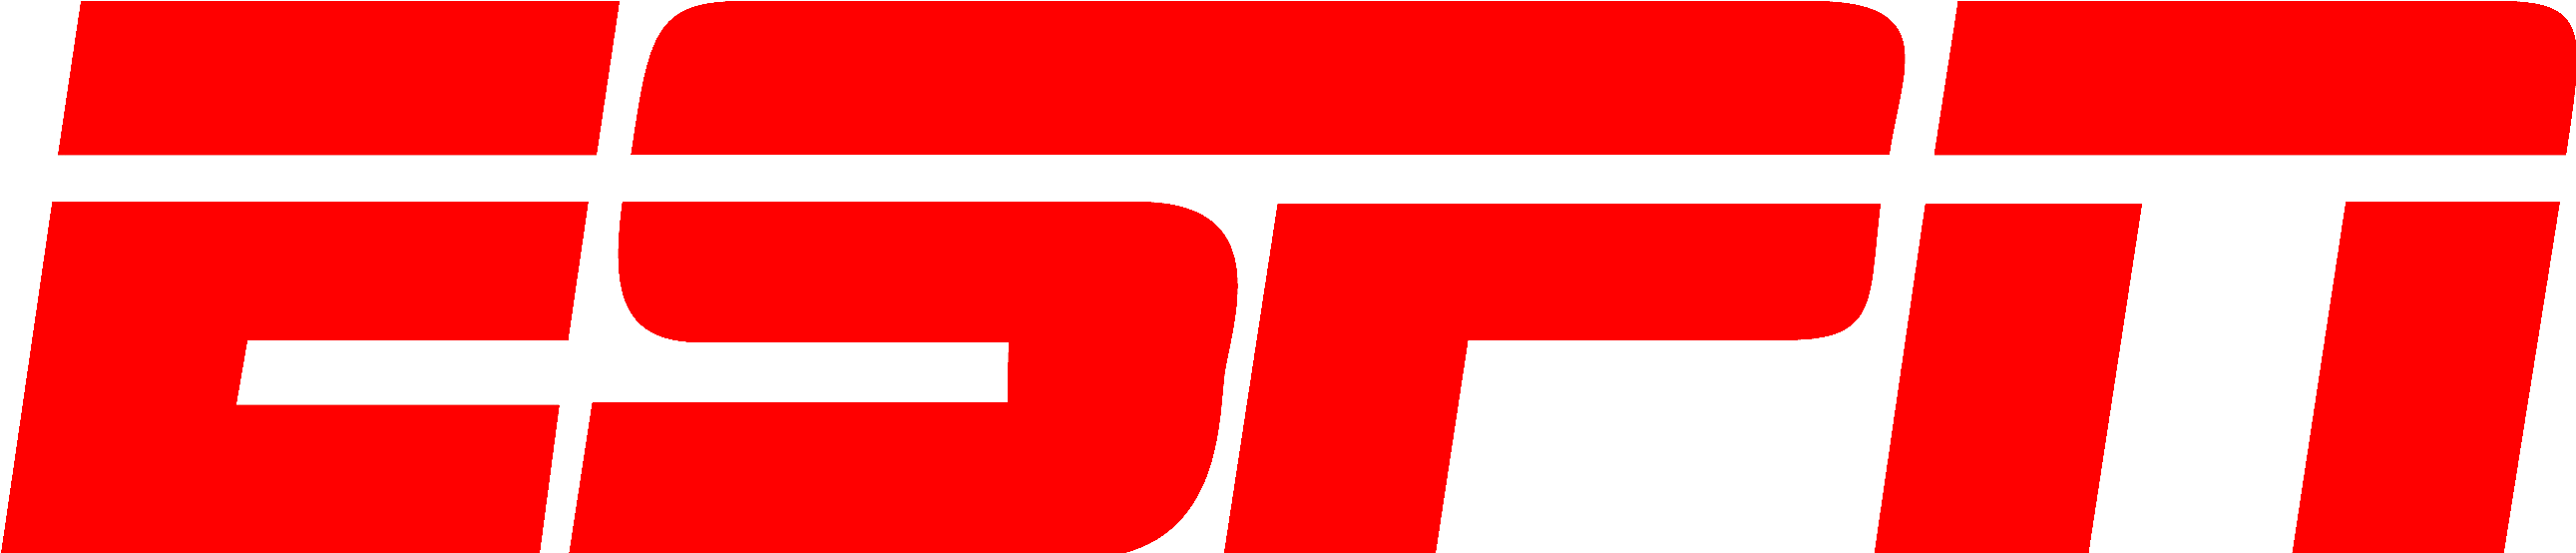 E S P N Logo Red Background PNG